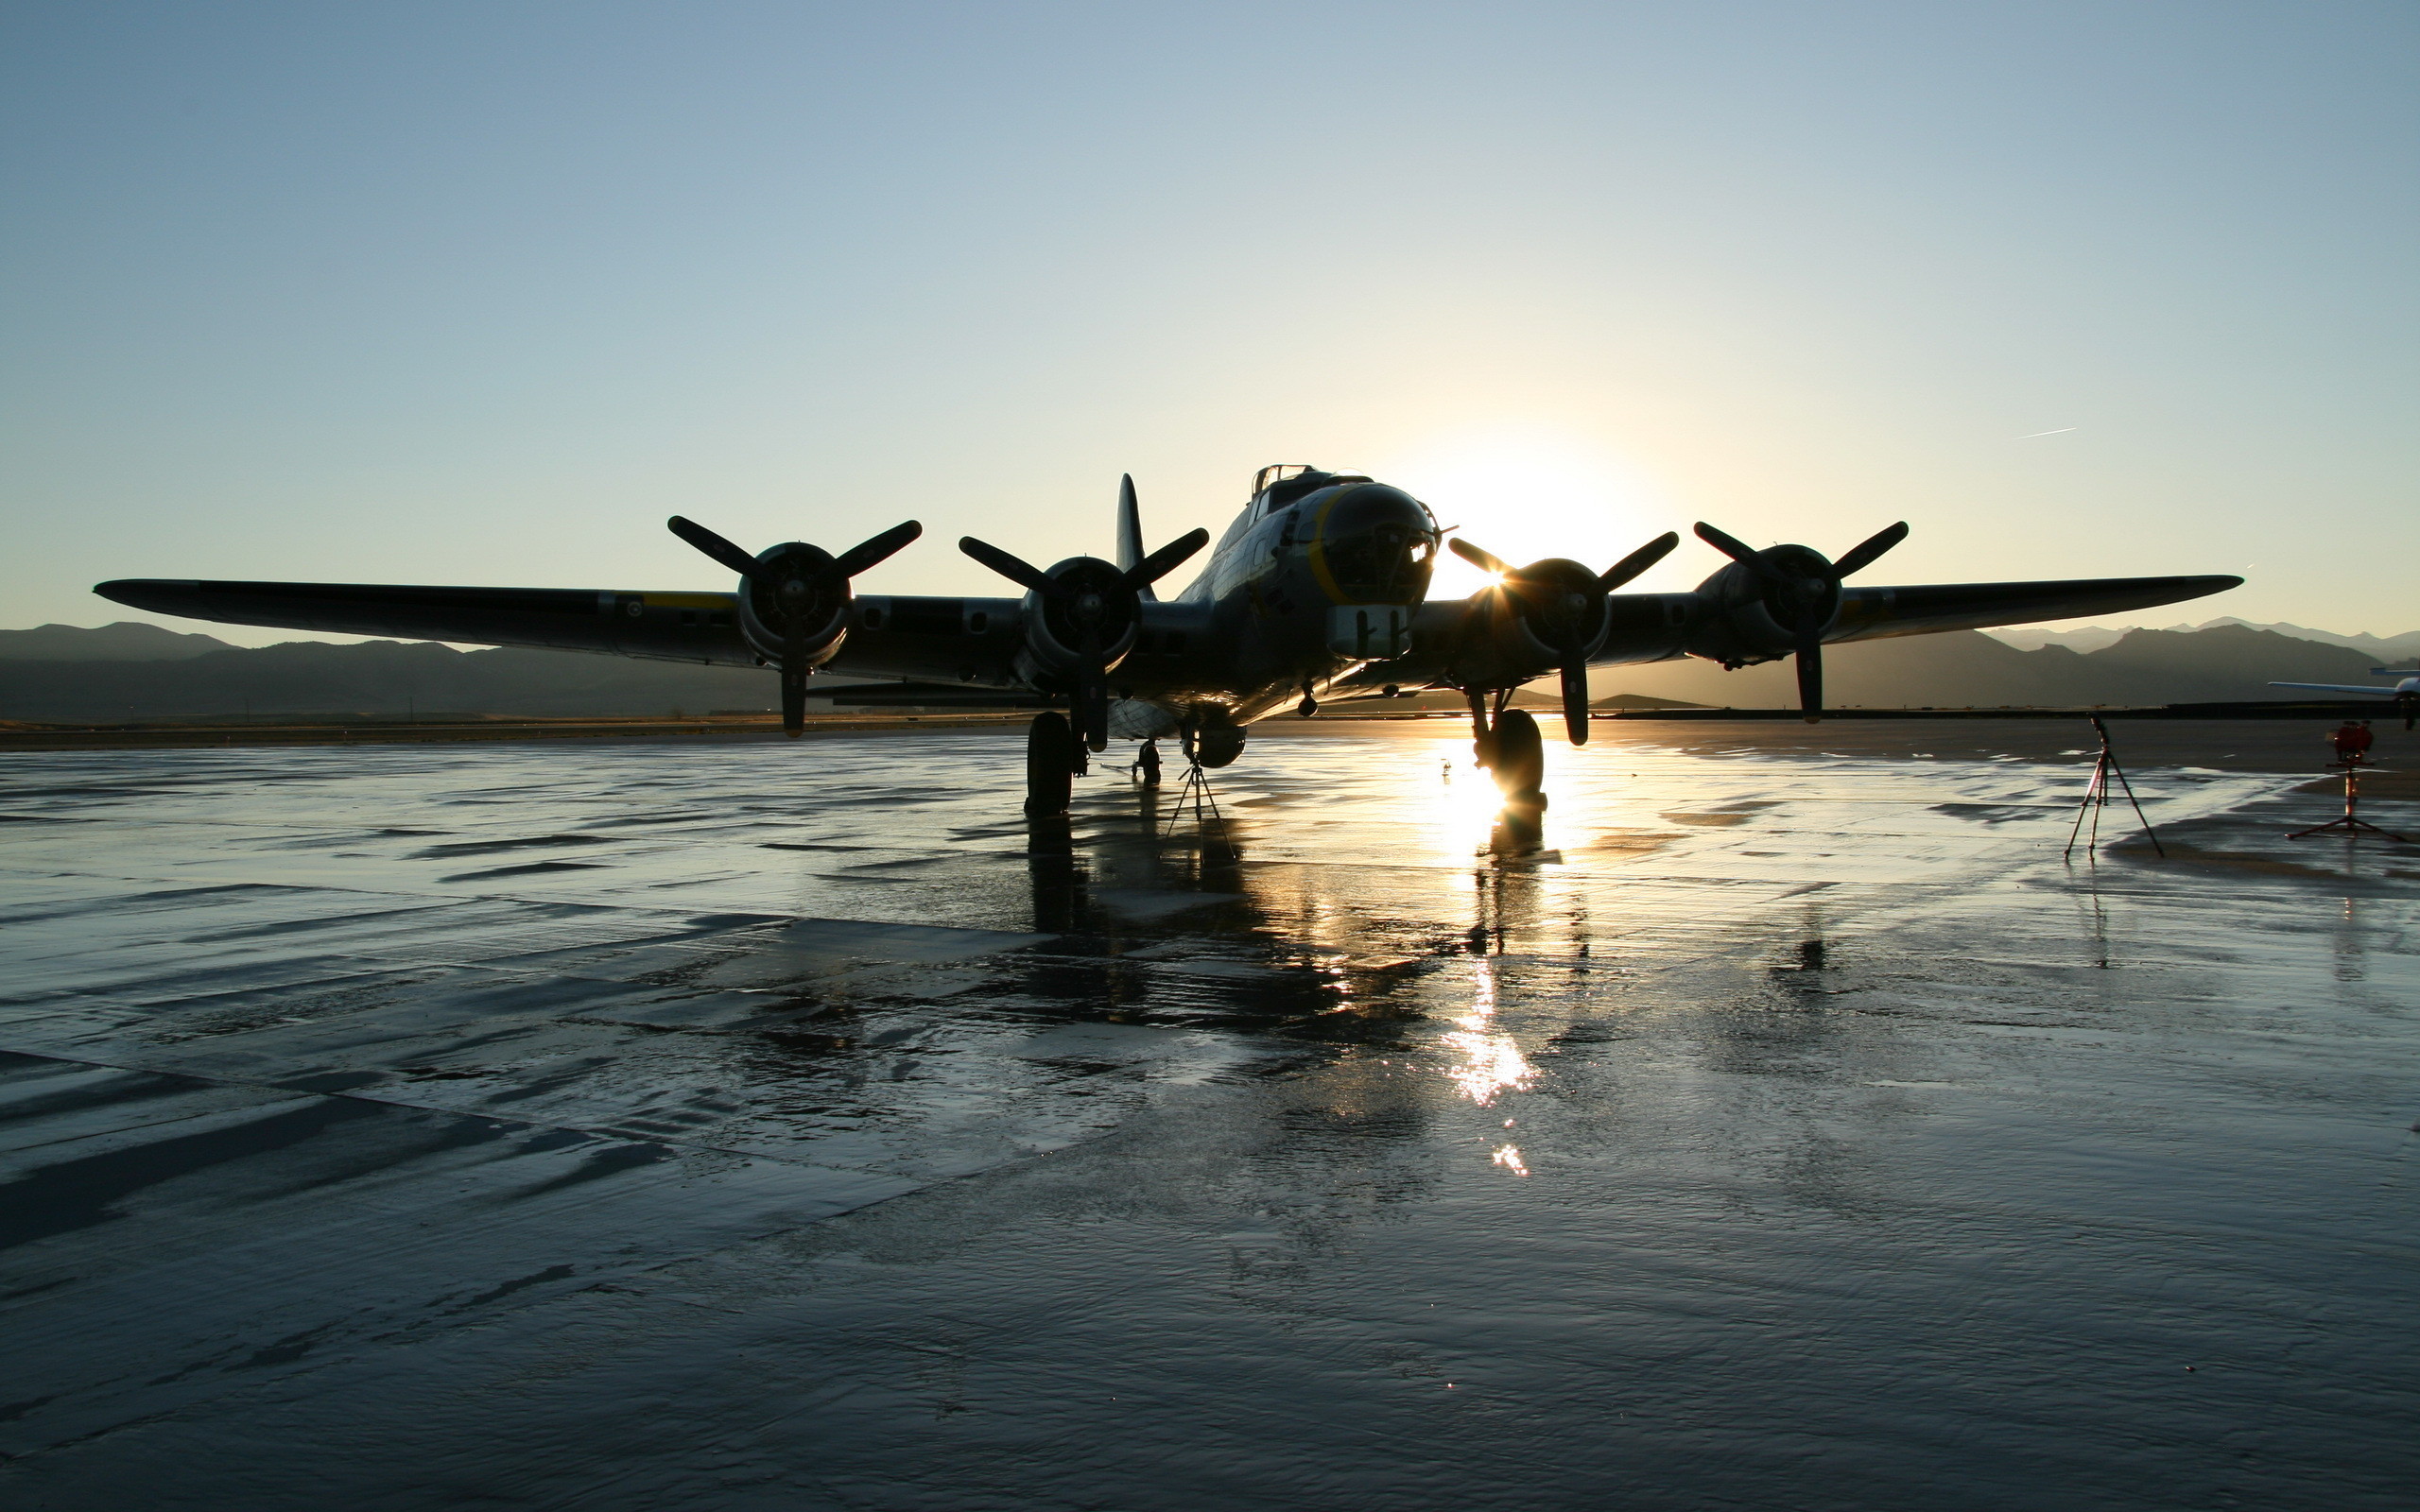 2560x1600 Wings, Flying Vehicles, Airplanes, Flight, Hd Airplane Images, Free War  Plane. Plane Wallpapers ...